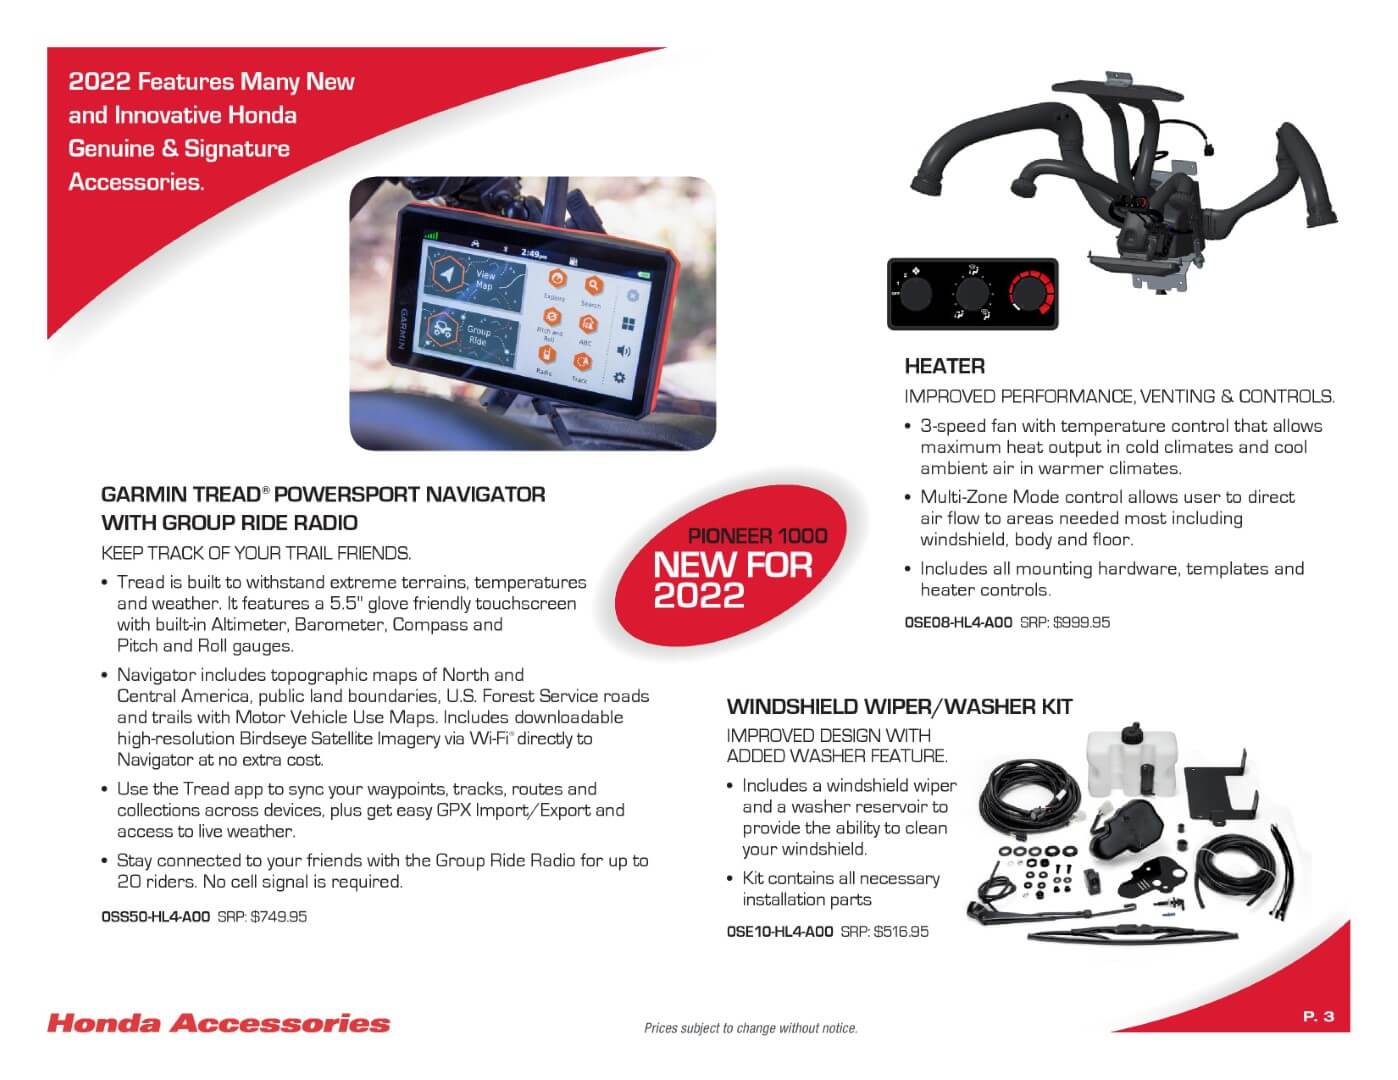 2022 Honda Pioneer 1000 Accessory Catalog / Accessories | Page 3 (including Pioneer 1000-5 Accessories)